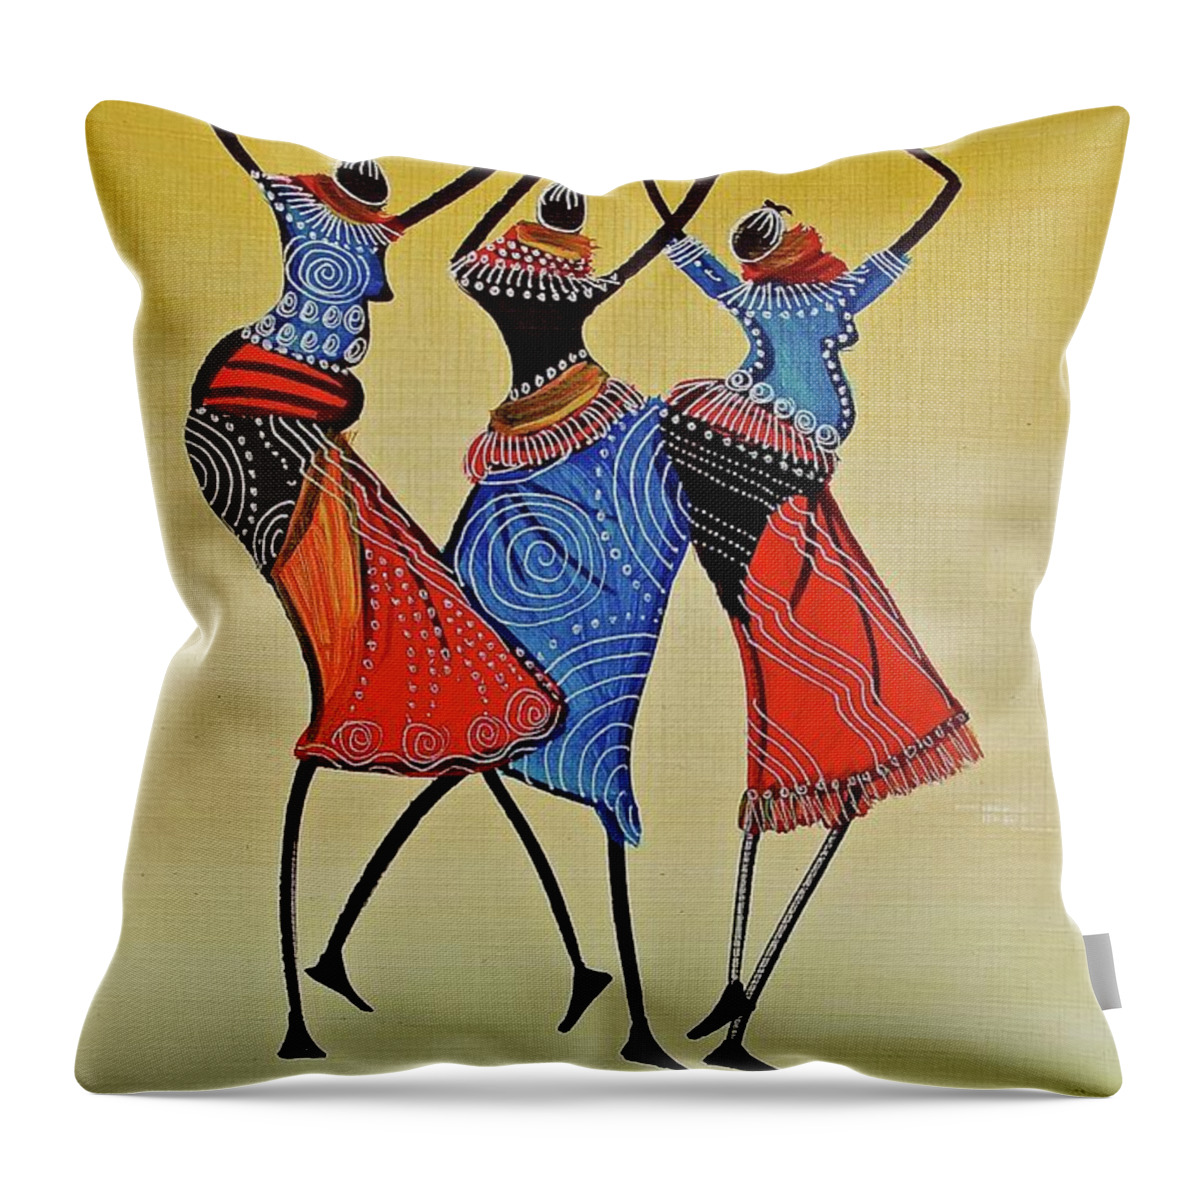 Africa Throw Pillow featuring the painting B-261 by Martin Bulinya